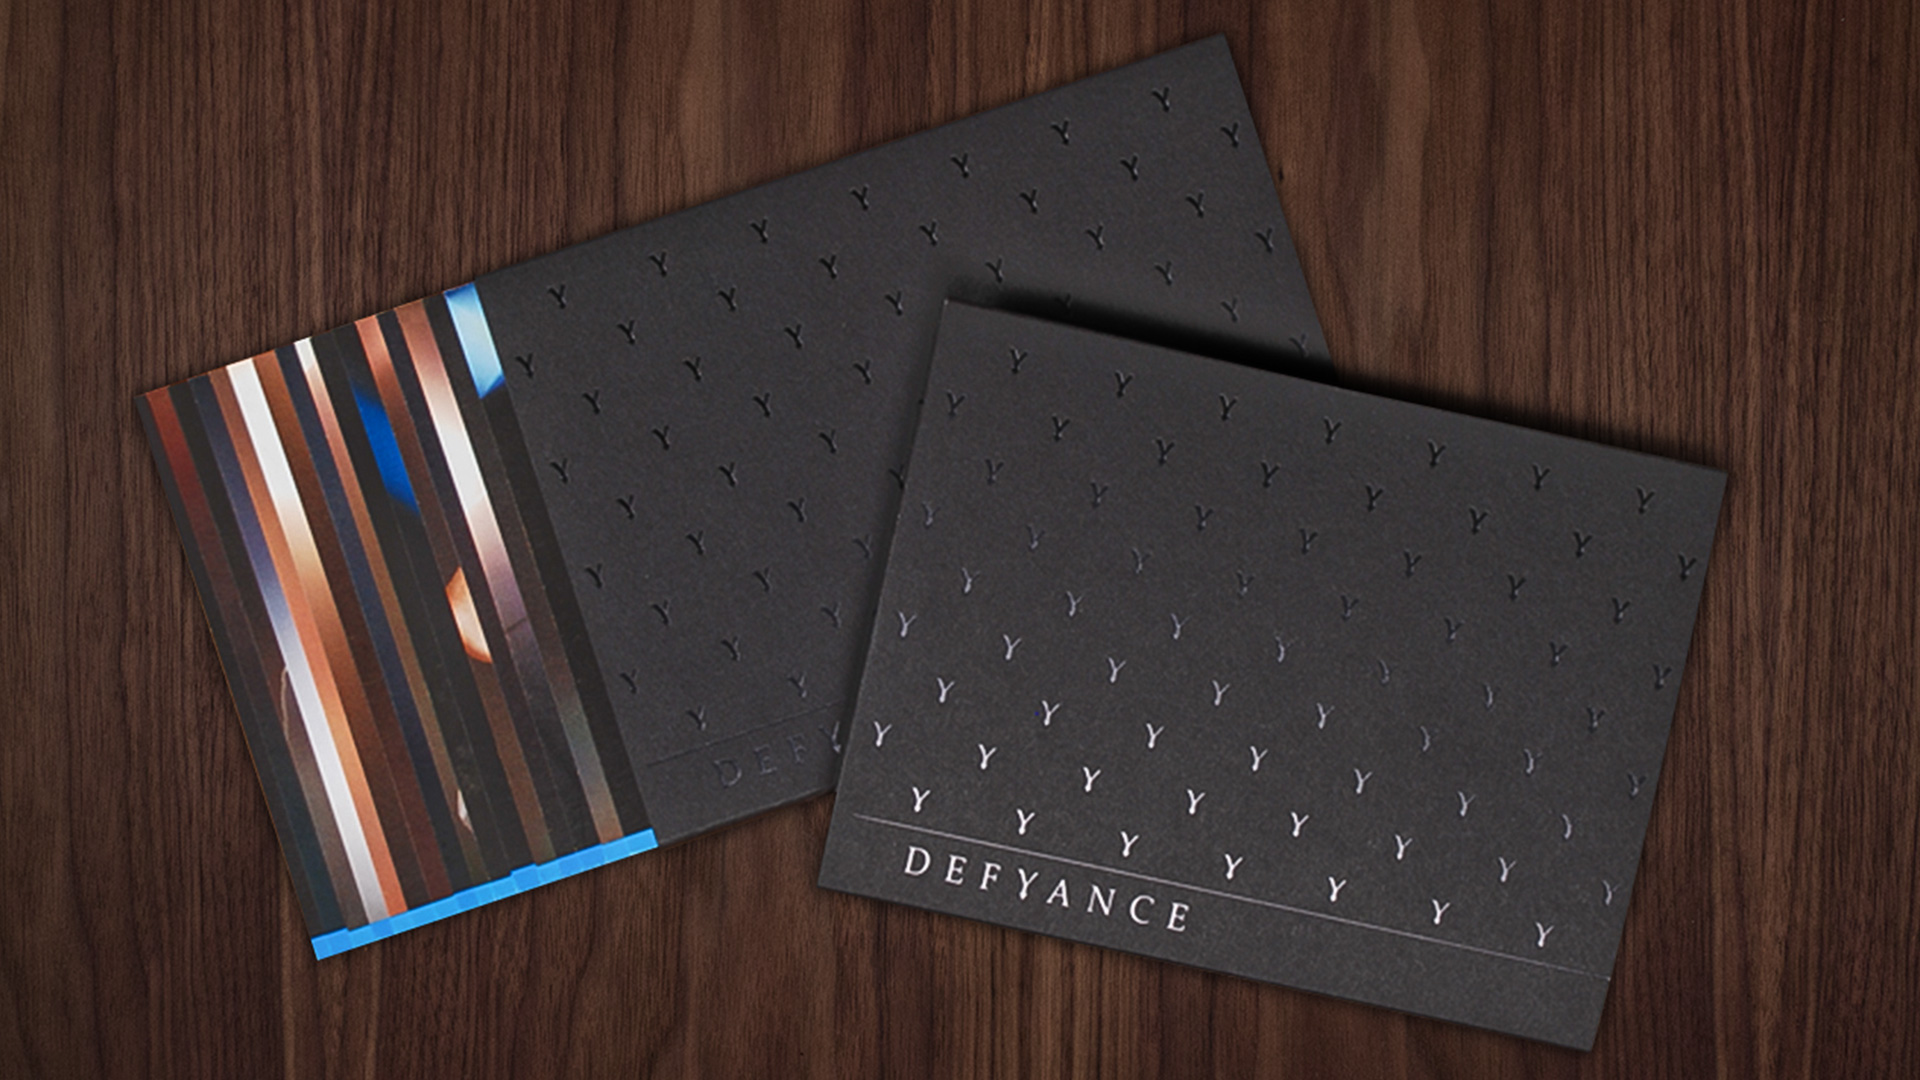 Brand materials for Defyance Clothing brand